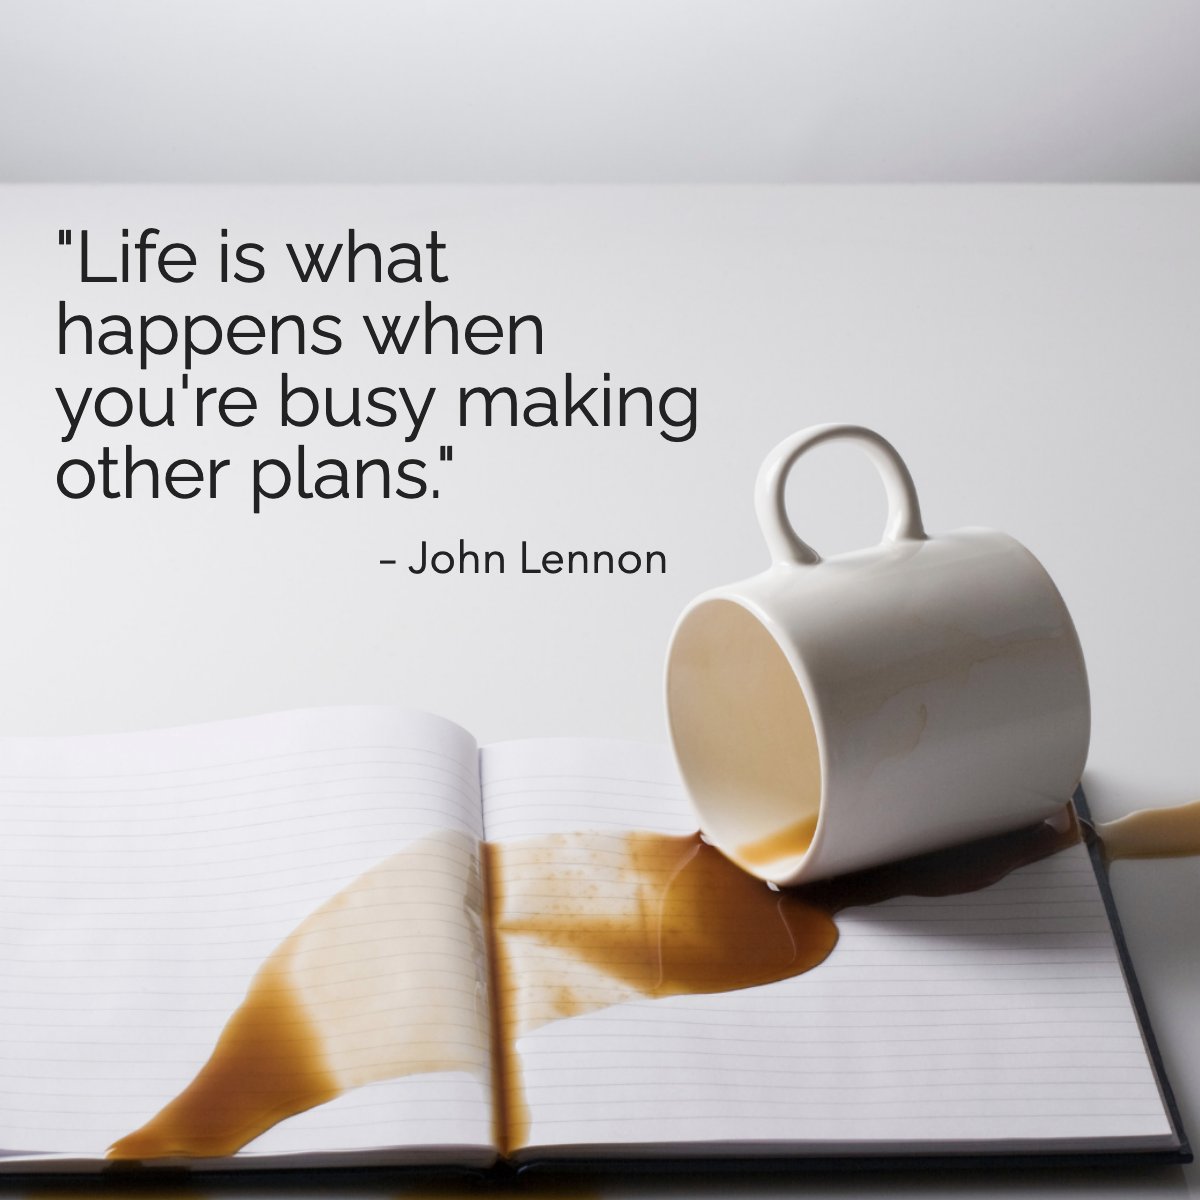 Did you know this famous quote is from John Lennon?

#inspiring #plans #quote #johnlennon #life
 #RiversideRealestate #RiversideHomes #RiversideBroker #JamesCottrell #jamesforhomes